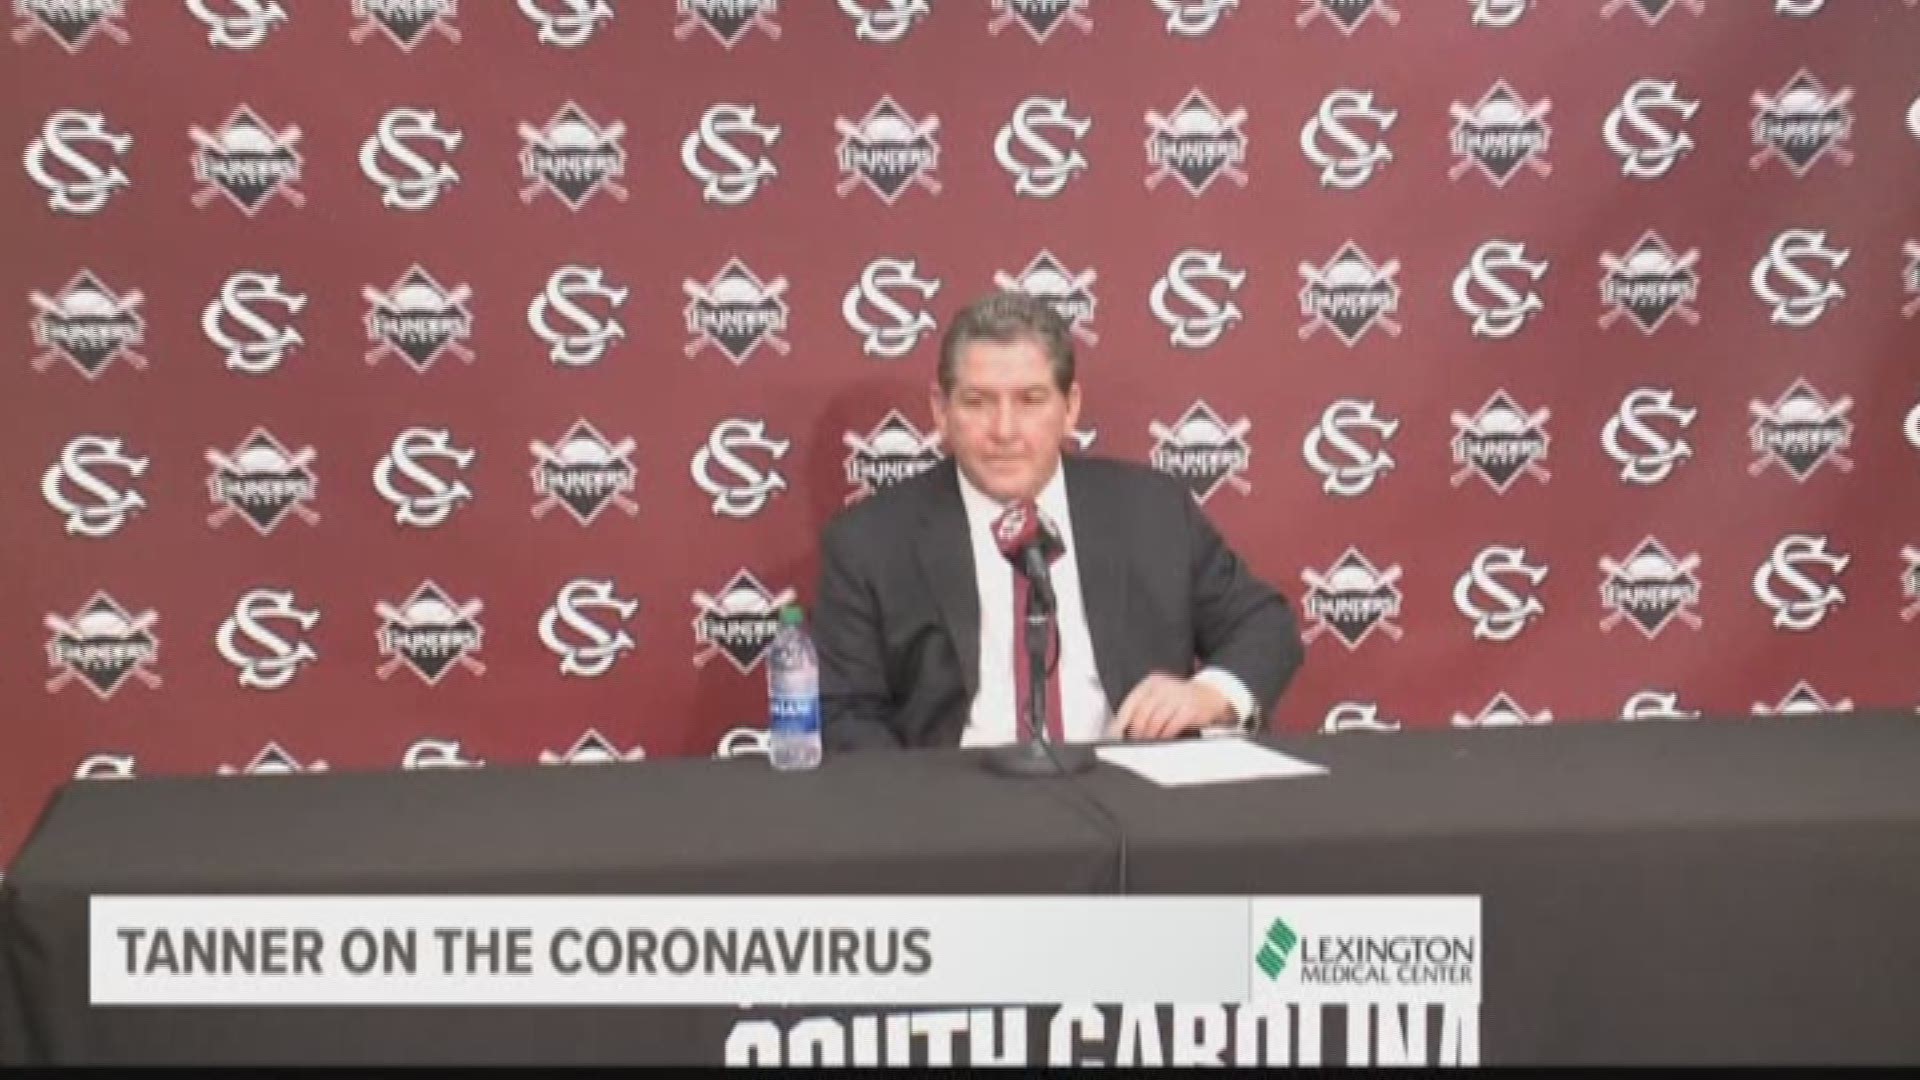 USC AD talks about dealing with the coronavirus